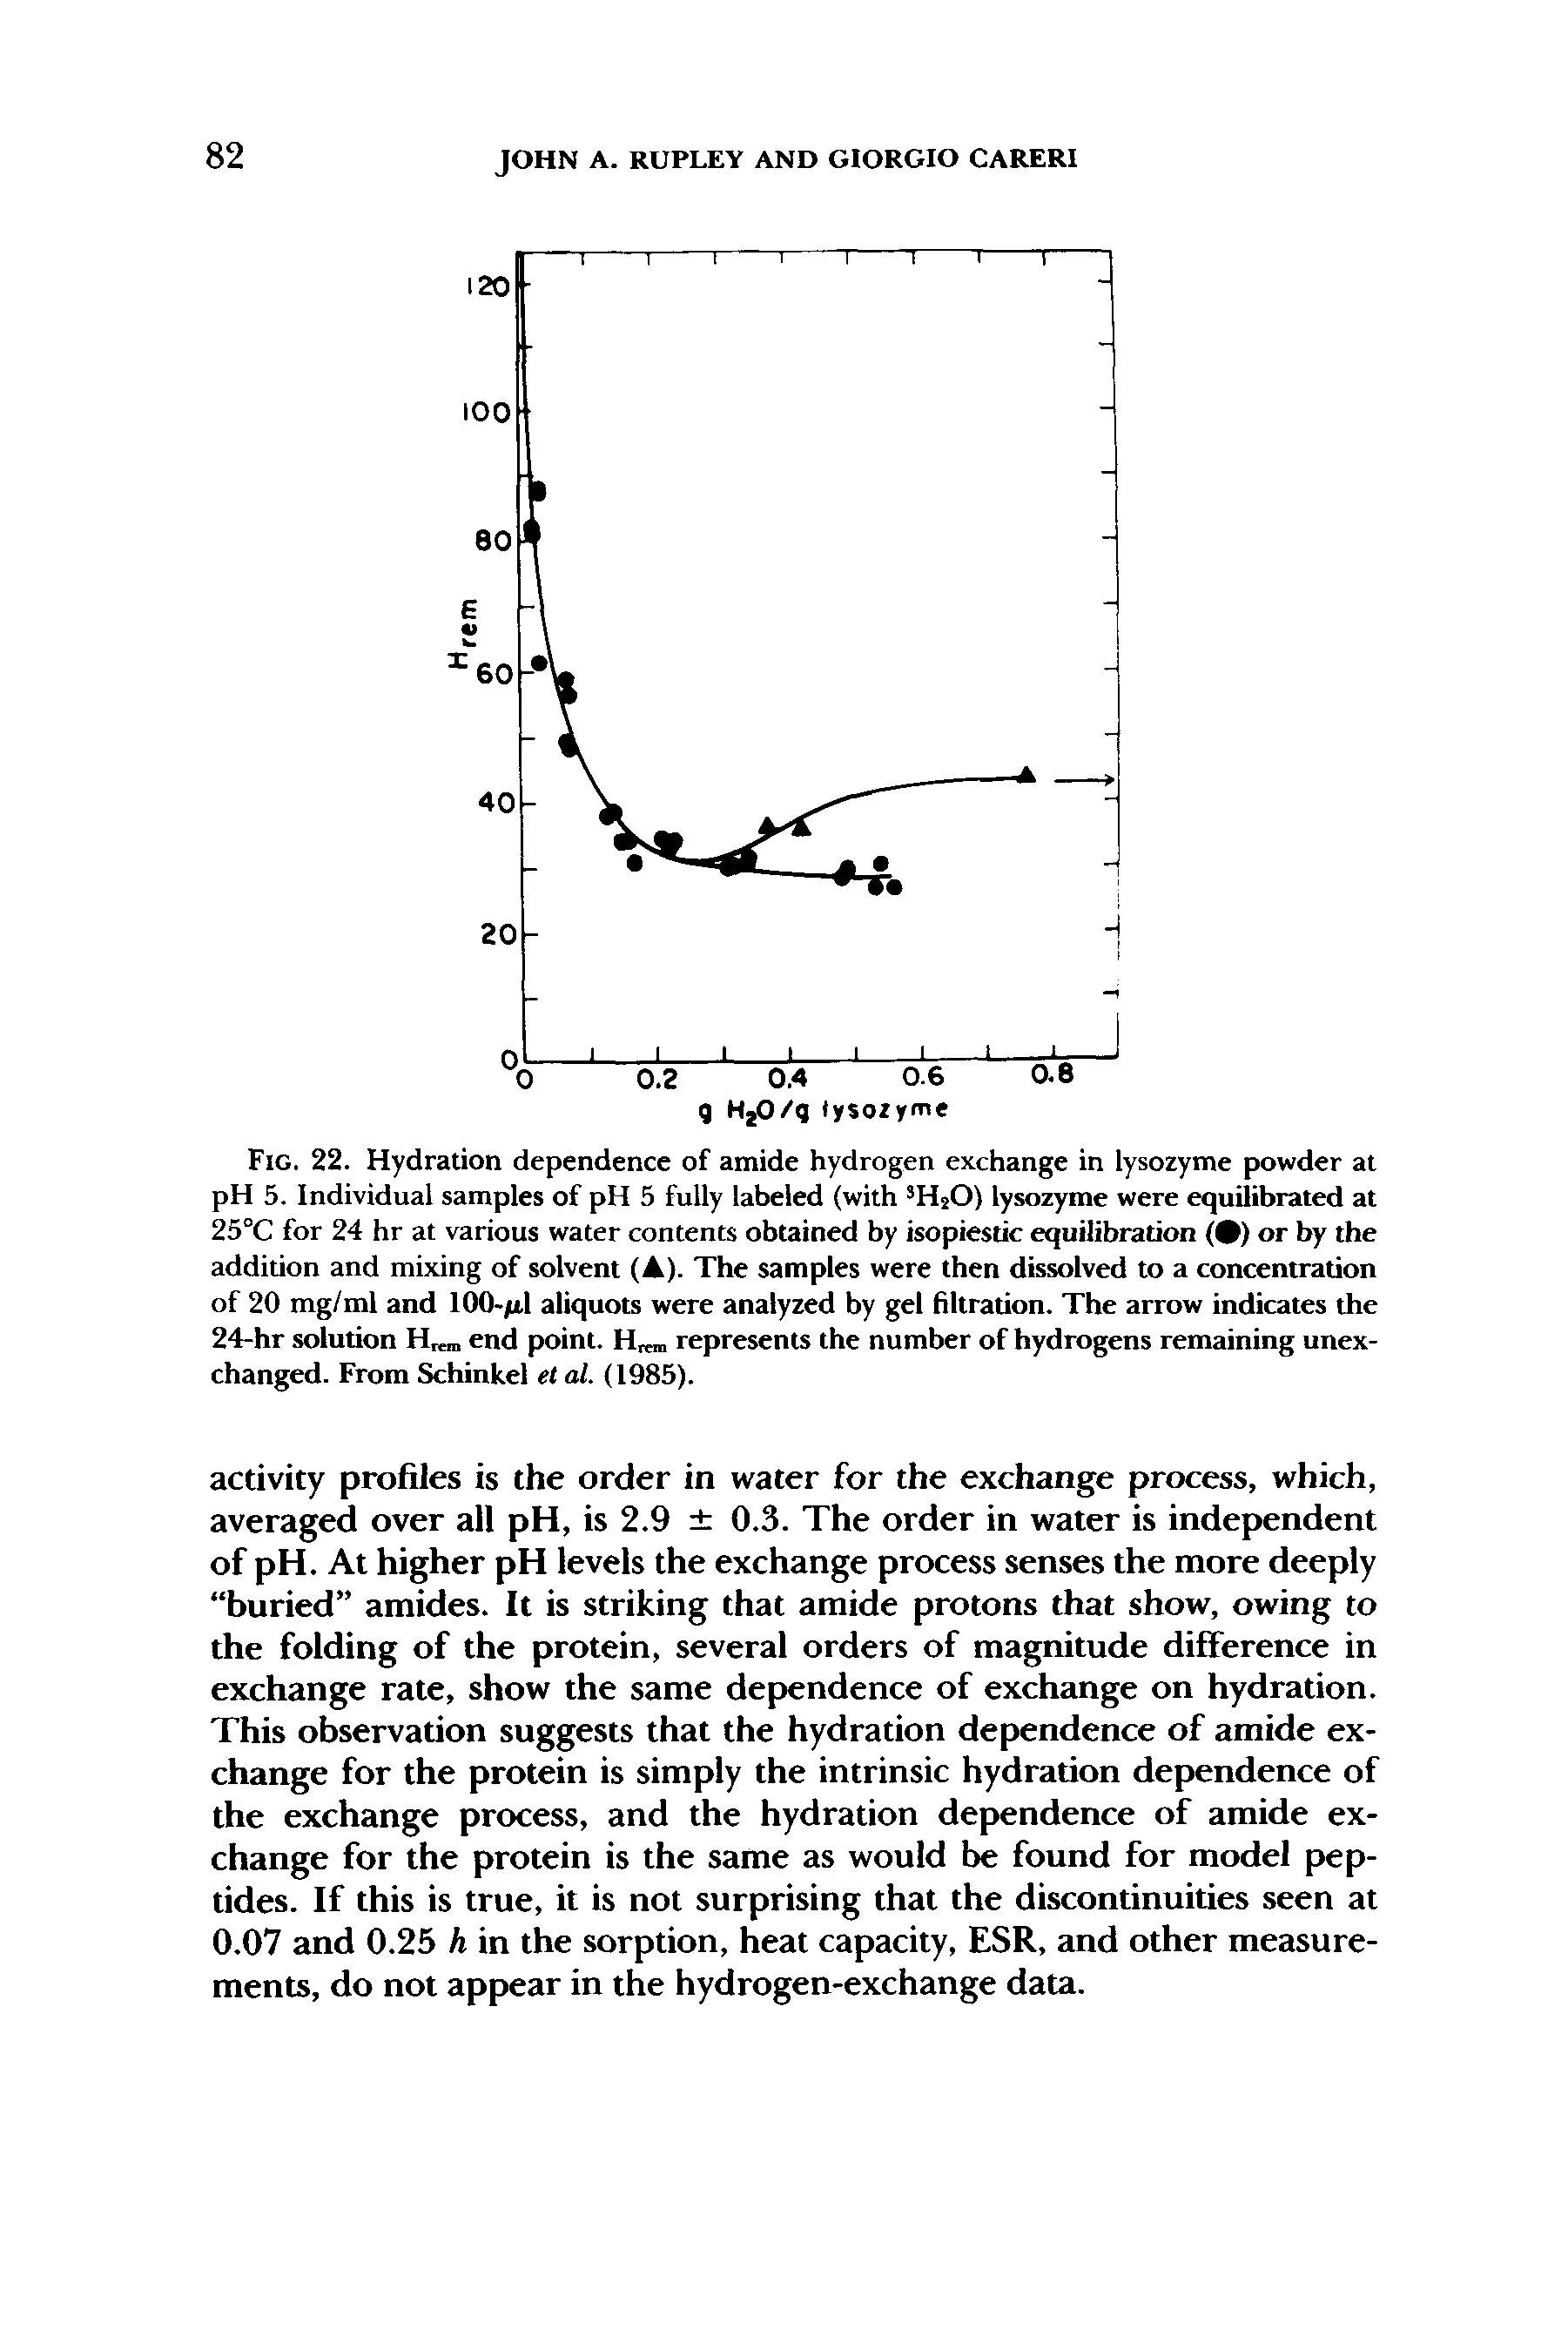 Fig. 22. Hydration dependence of amide hydrogen exchange in lysozyme powder at pH 5. Individual samples of pH 5 fully labeled (with H O) lysozyme were equilibrated at 25°C for 24 hr at various water contents obtained by isopiestic equilibration ( ) or by the addition and mixing of solvent (A). The samples were then dissolved to a concentration of 20 mg/ml and 100-/U.1 aliquots were analyzed by gel filtration. The arrow indicates the 24-hr solution H . end point. H, represents the number of hydrogens remaining unexchanged. From Schinkel el al. (1985).